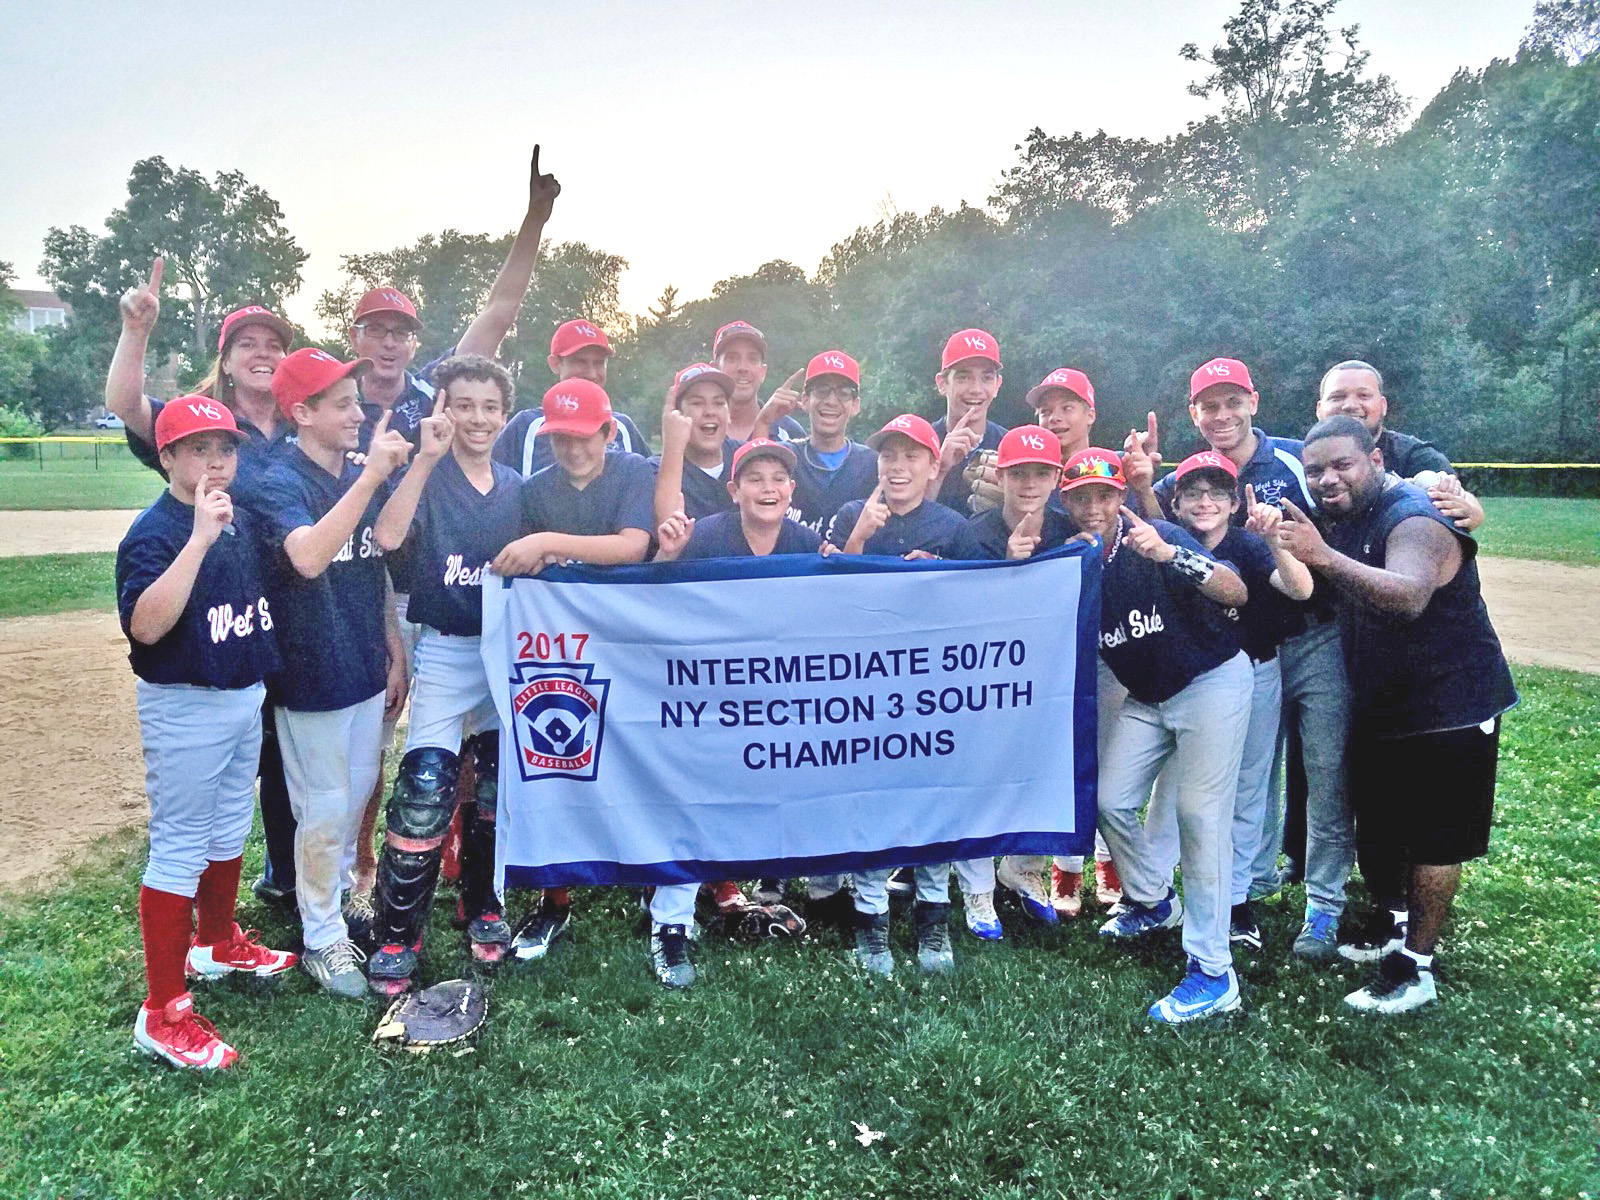 West Side Little League - WSLL 13u Hawks - NYC 2017 50/70 Sectional Champions!